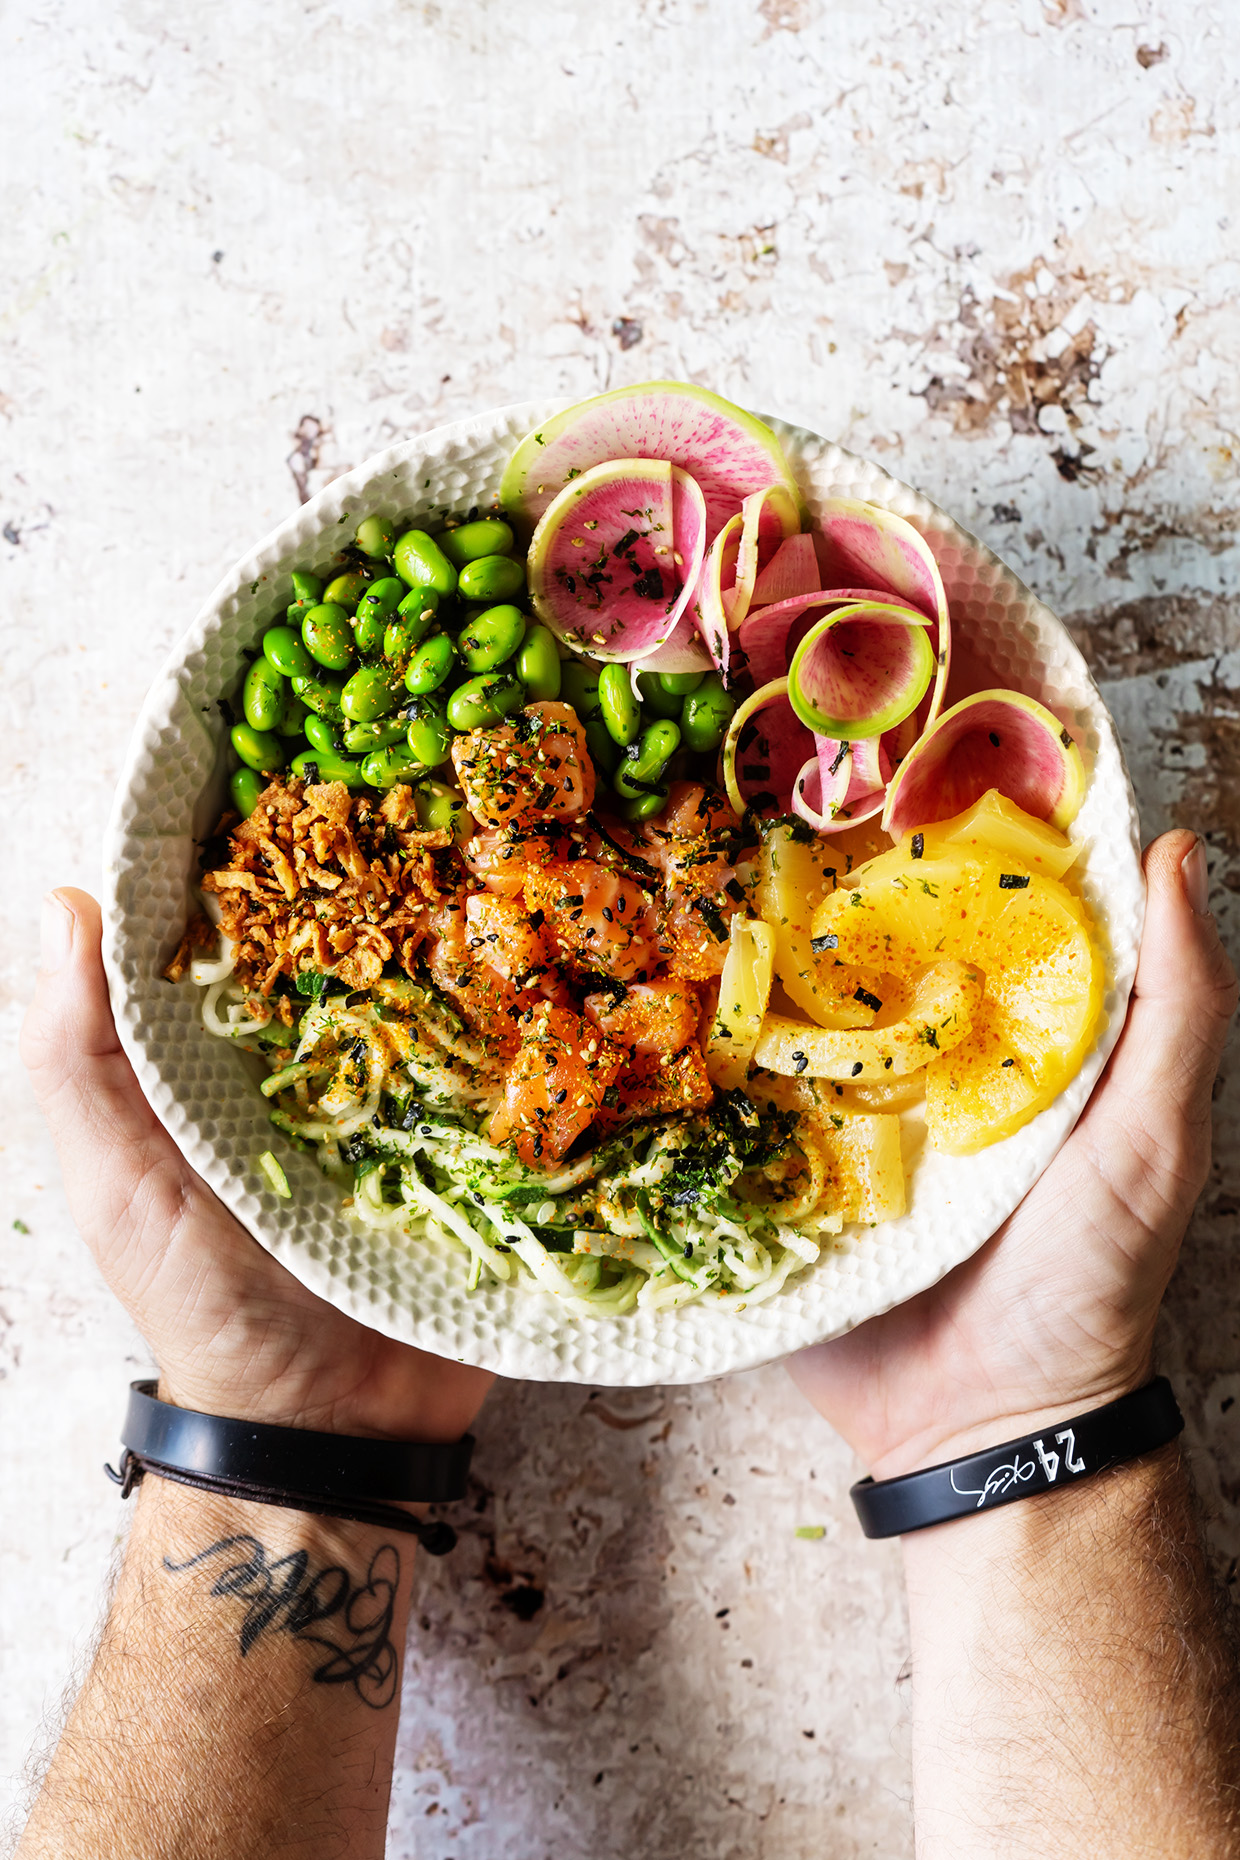 Salmon Poke Bowl with salmon, pineapple rings, radishes, edamame, and zucchini noodles.